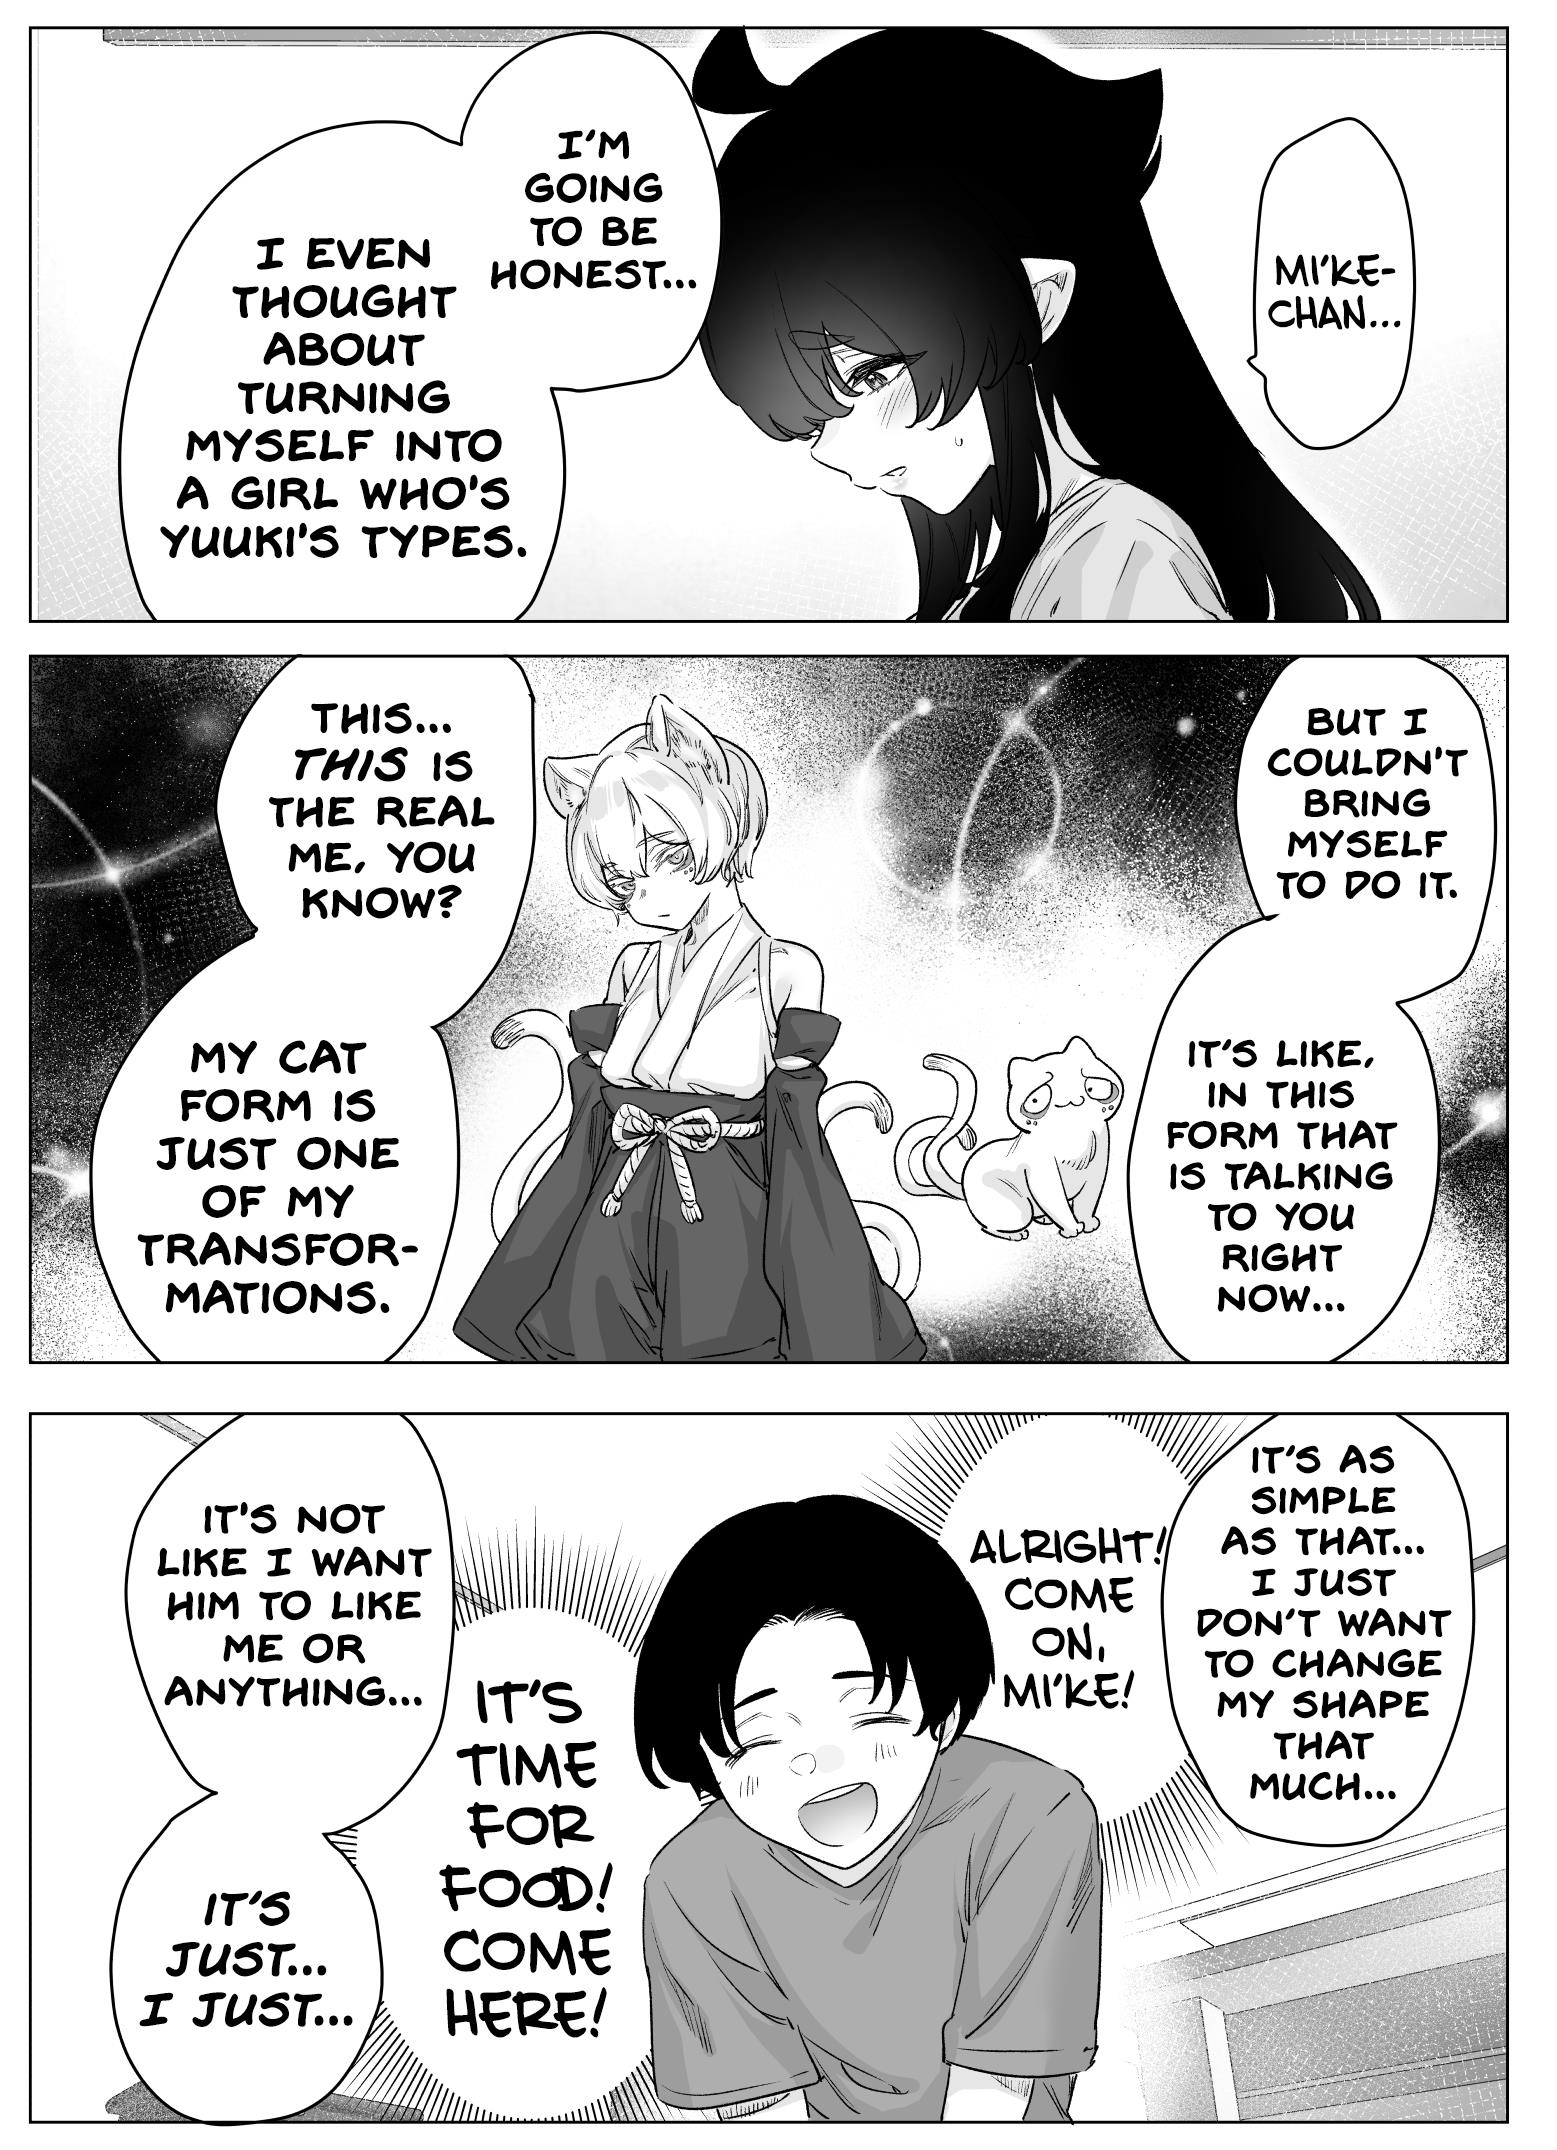 Even Though She's The Losing Heroine, The Bakeneko-Chan Remains Undaunted - Page 2